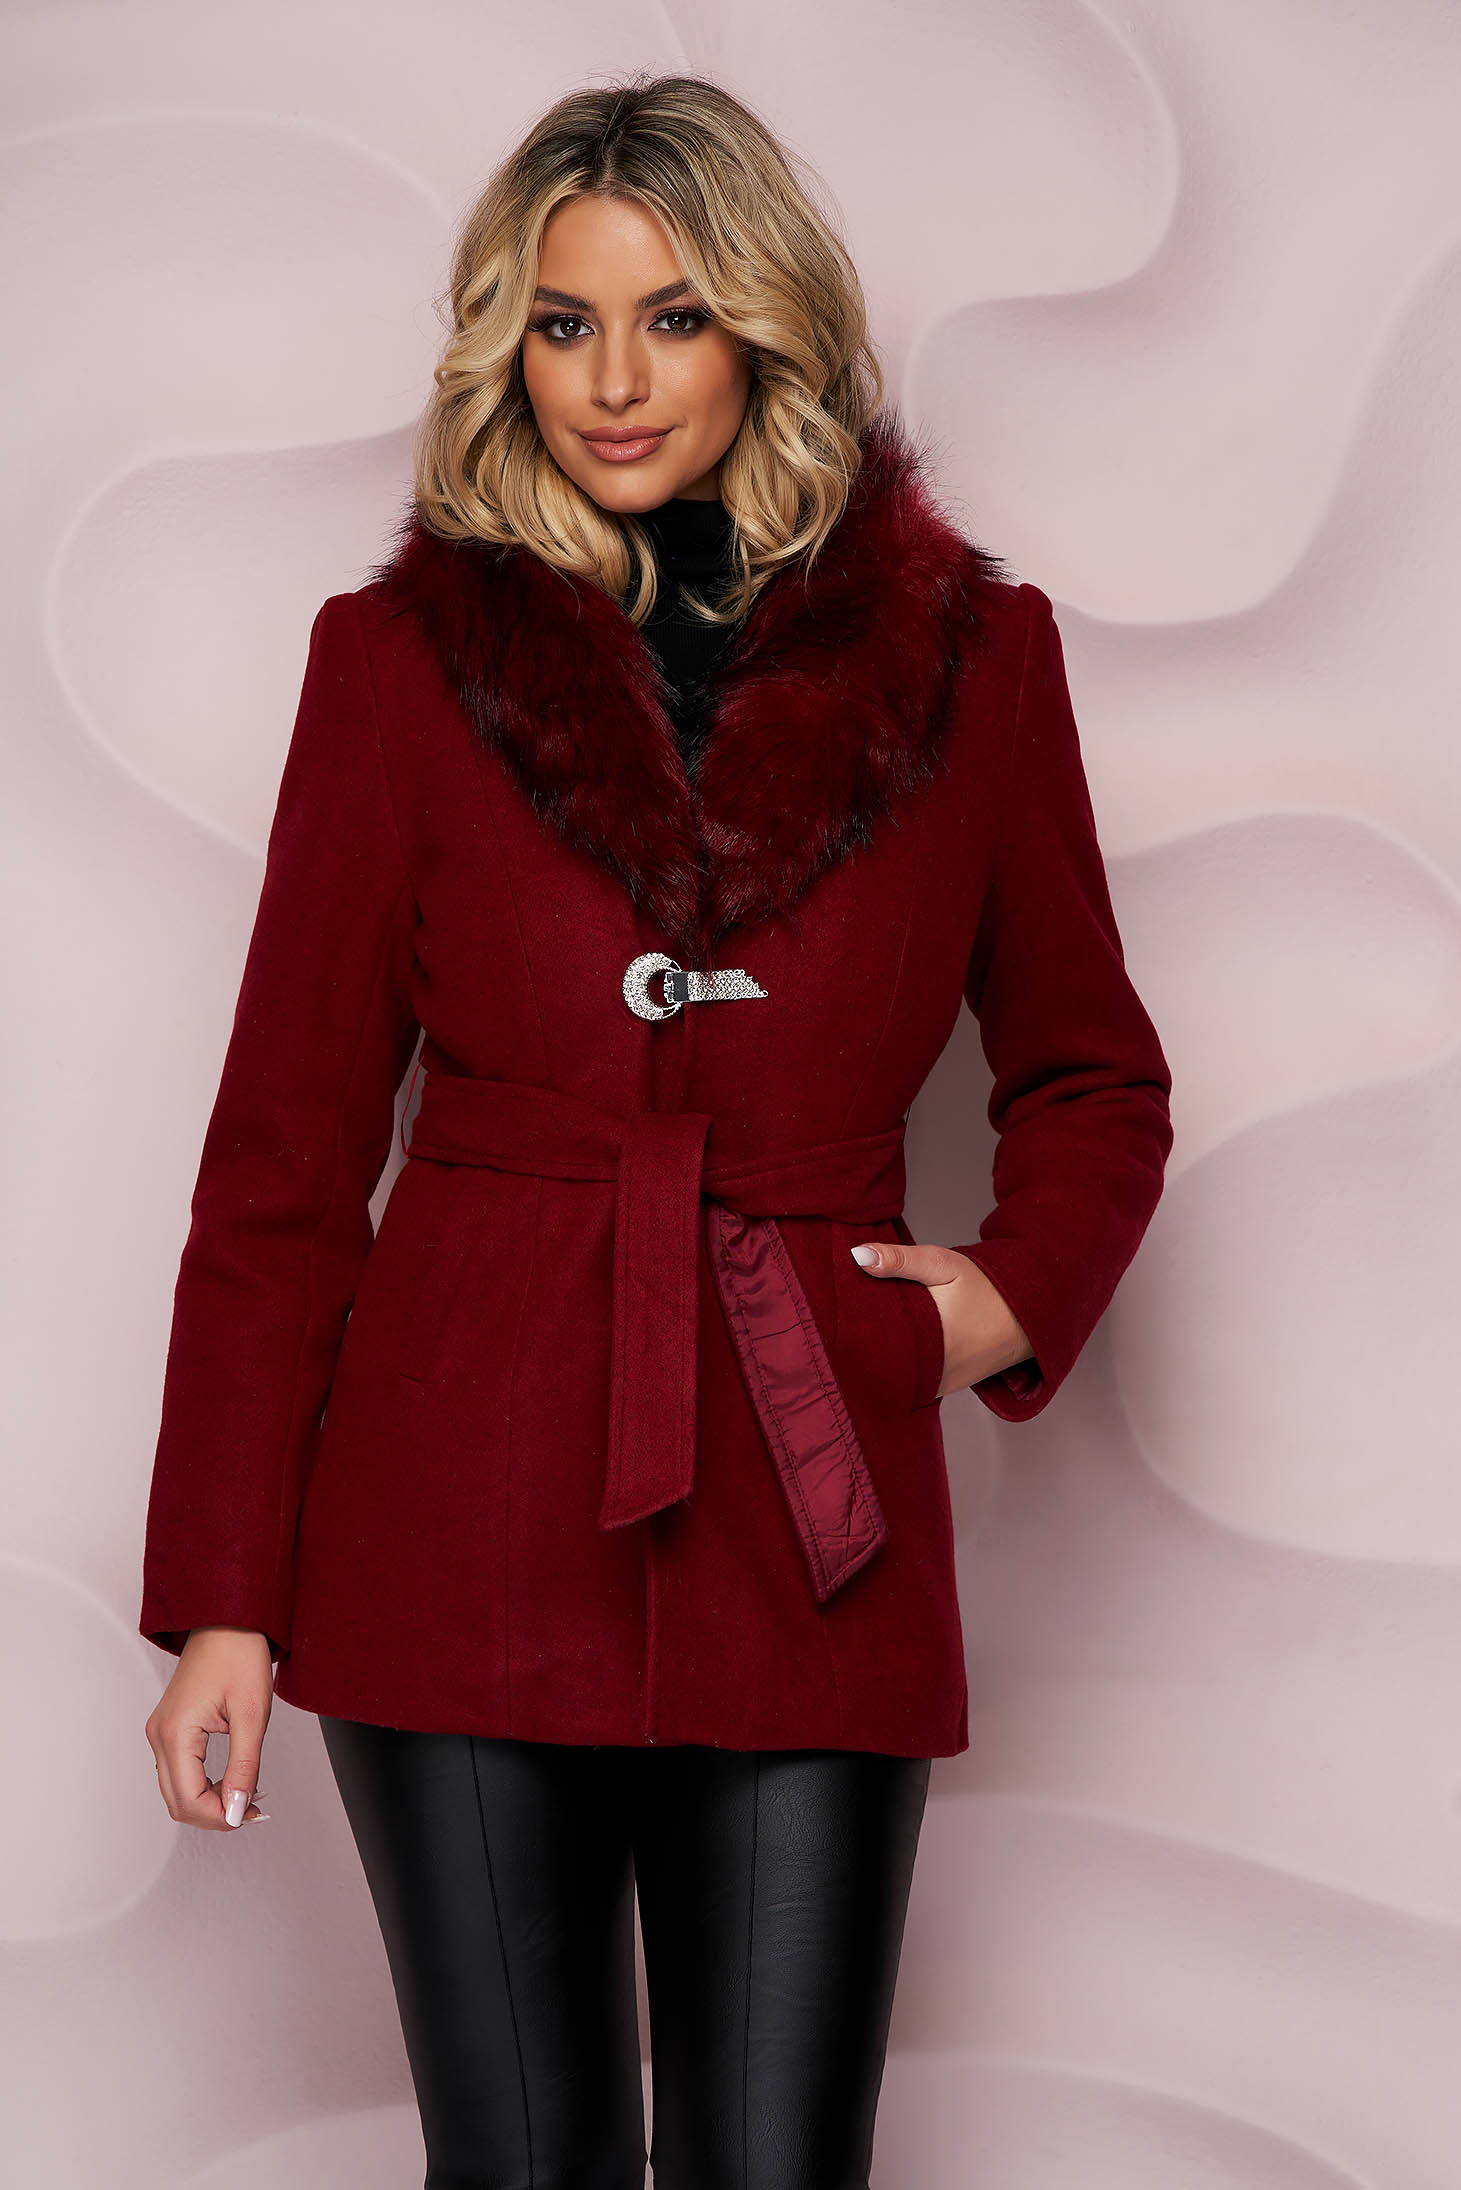 Burgundy coat tented accessorized with breastpin from wool